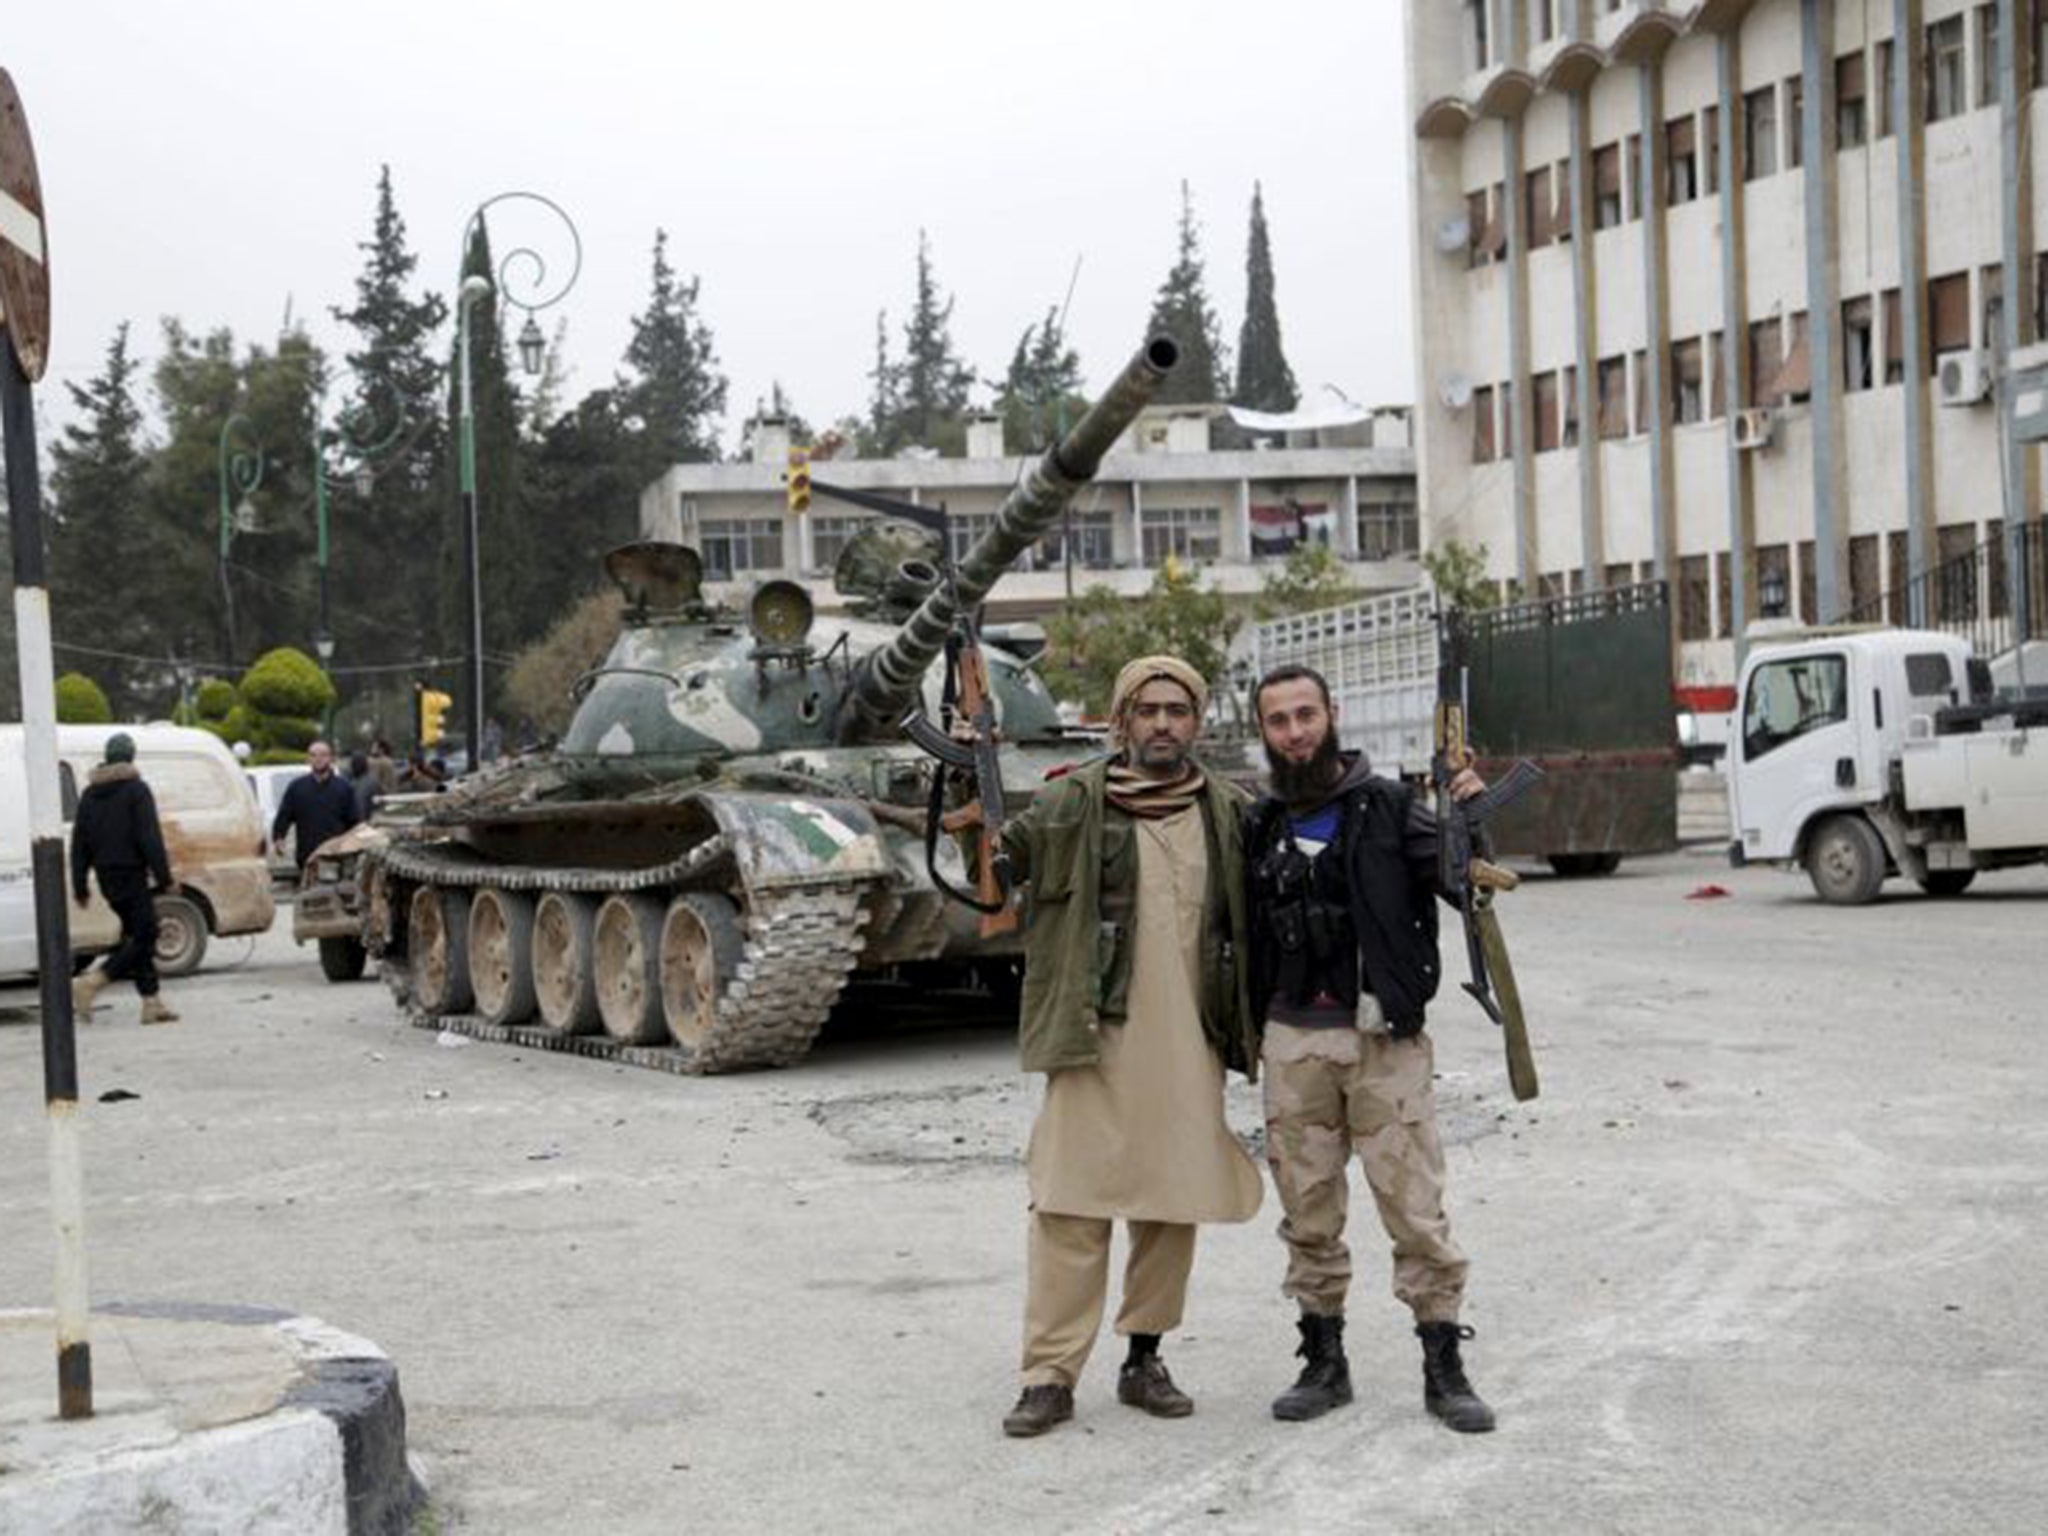 Jabhat al-Nusra’s fighters pose for a picture after the militants stormed Idlib on Saturday